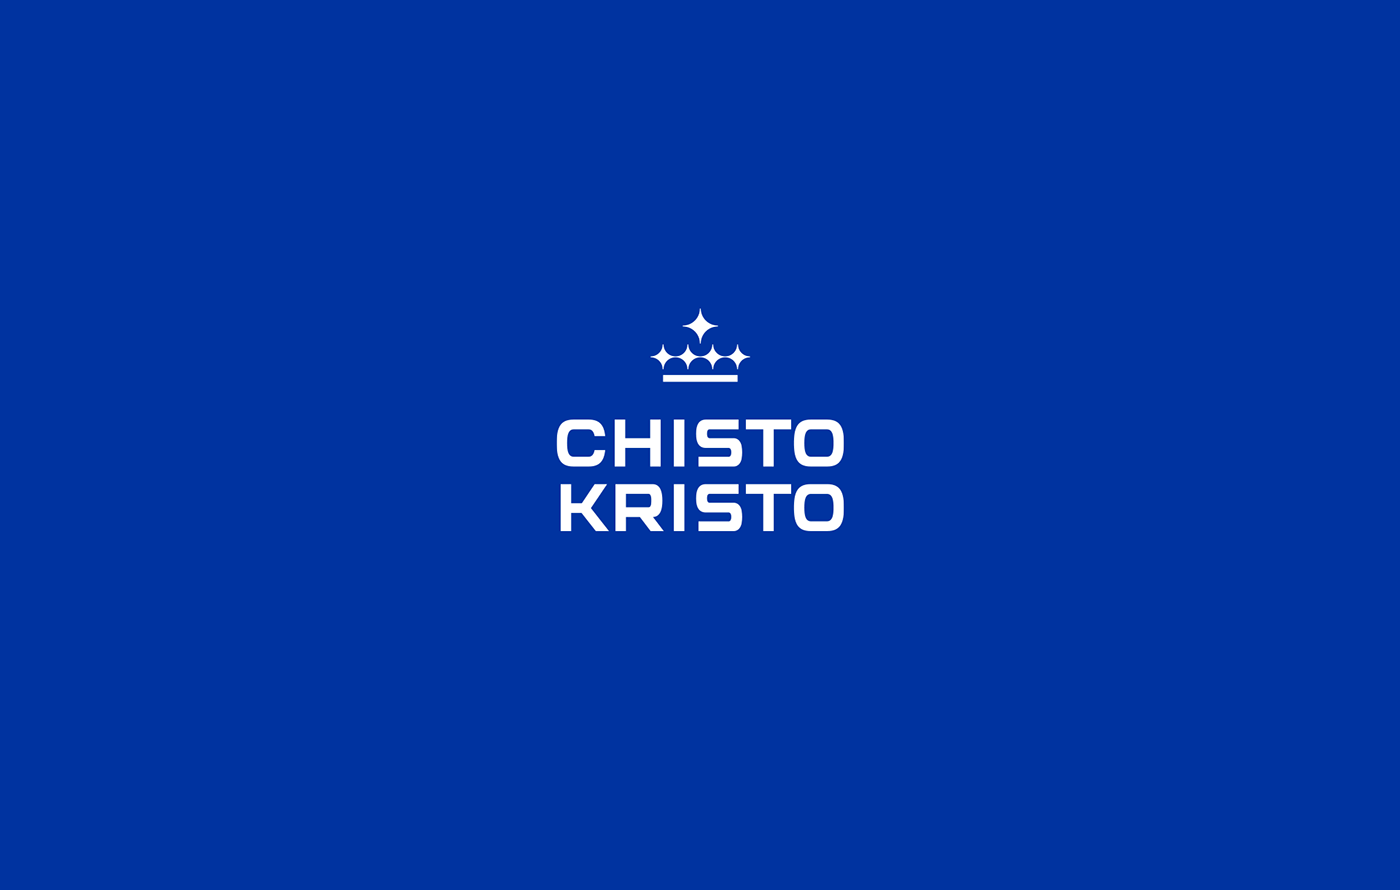 Creation of a logo and design of corporate media for the Chisto Kristo brand